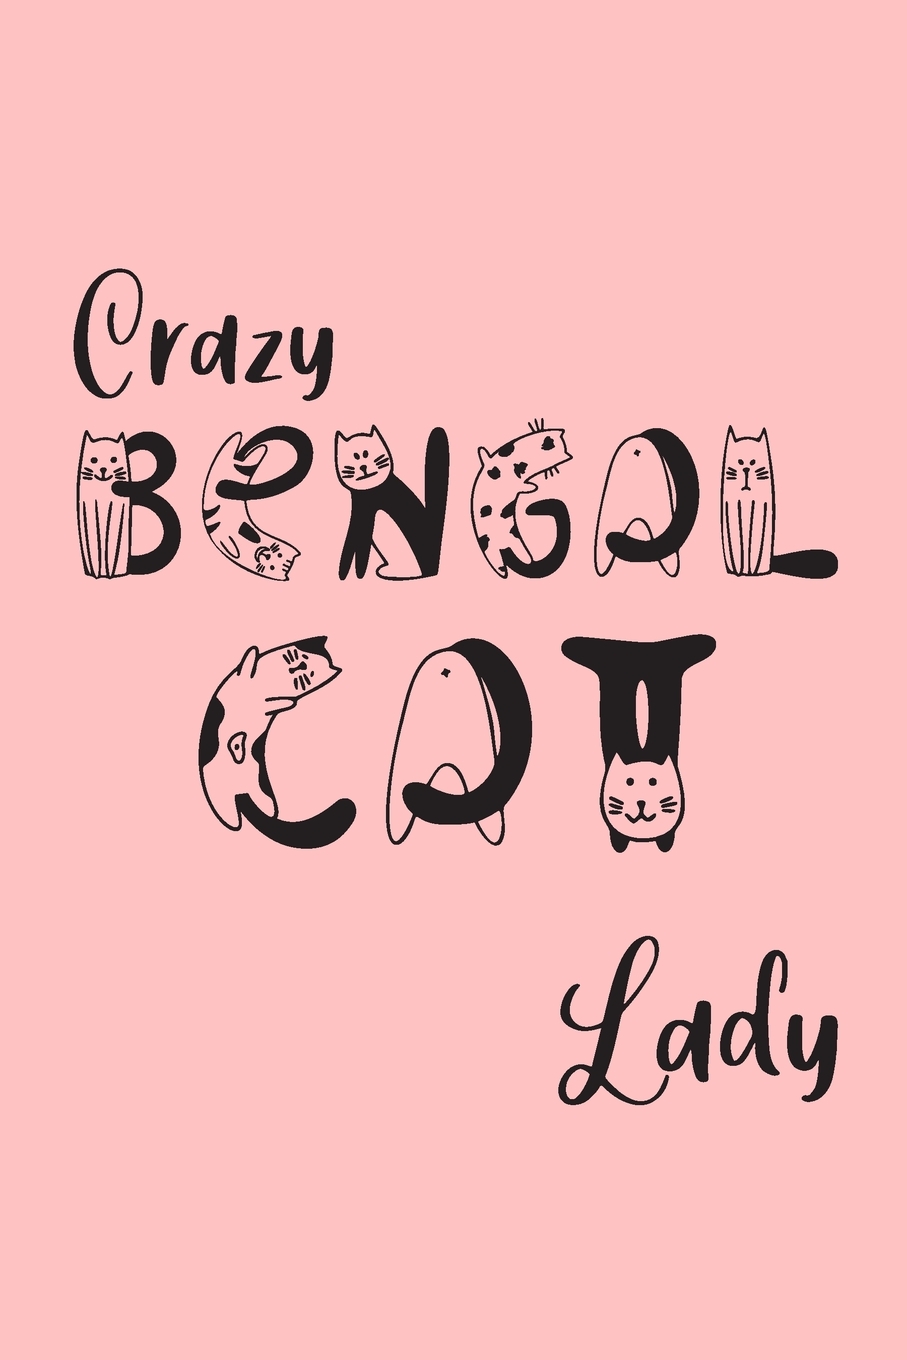 Crazy Bengal Cat Lady: Bengal Cat Gifts for Women - Undated Daily Planner - Featuring Cute Cat Letters on Pink Background (Paperback) - image 1 of 1